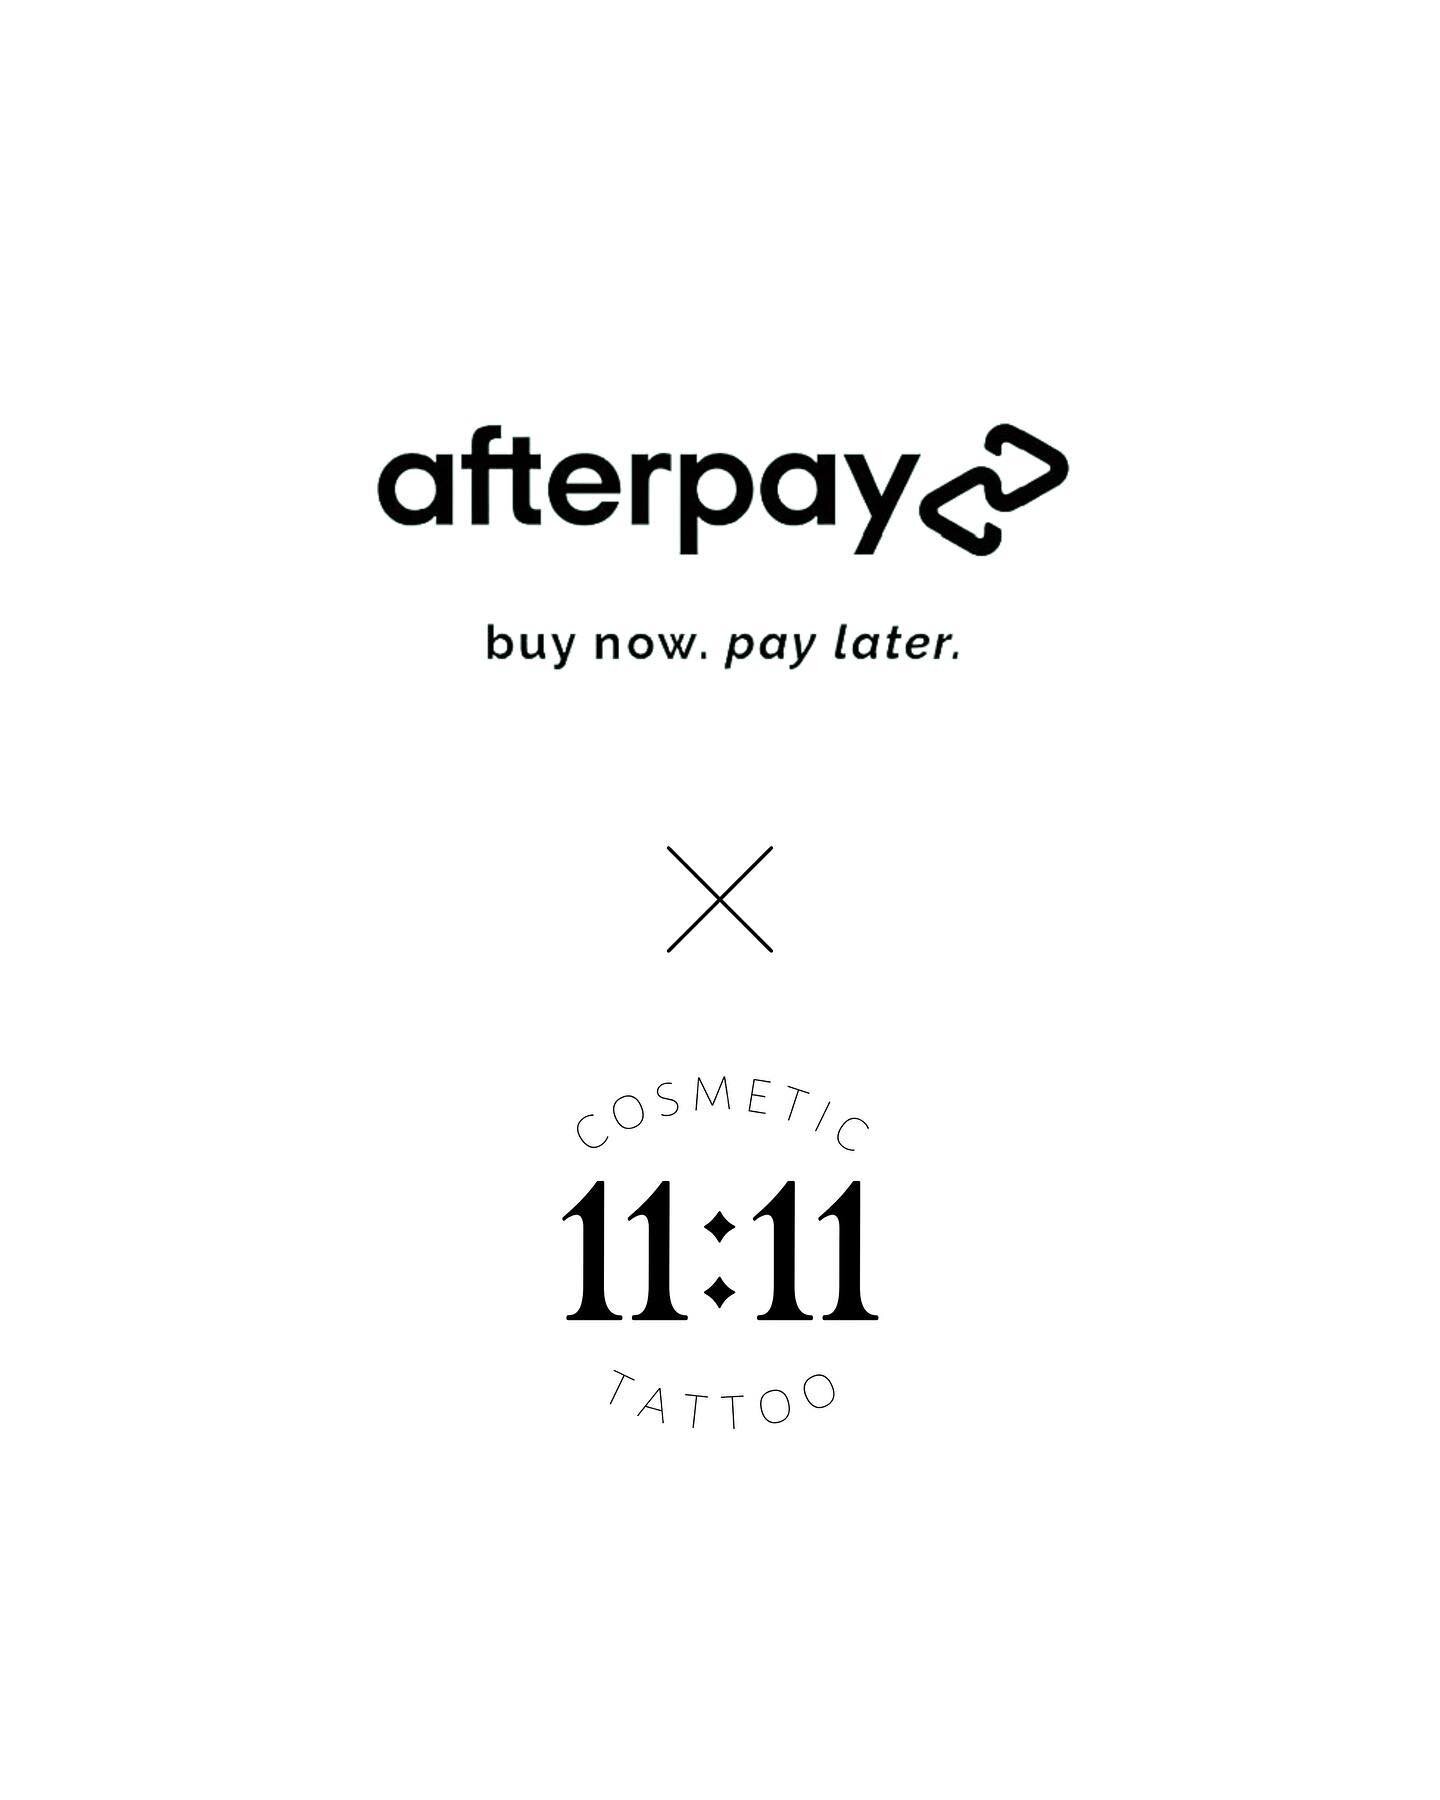 Yay!!! 11:11 Cosmetic Tattoo has partnered with Afterpay to offer a buy now pay later system for all of my services!🤍🤍

➡️Download and set up the AfterPay app to get your approved amount, you can use that balance to pay for your services in my stud